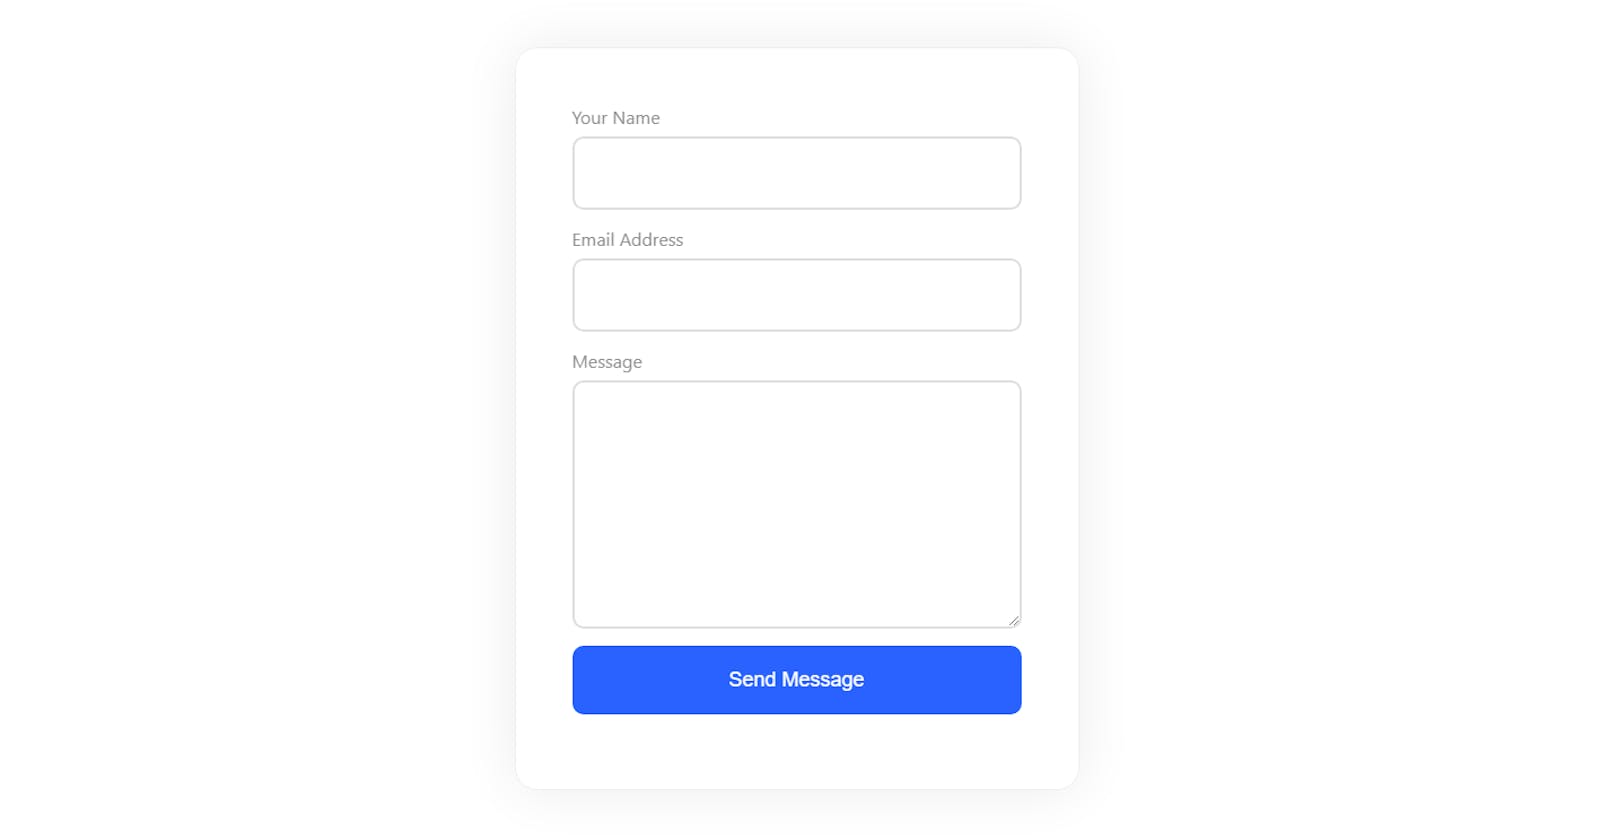 How to Setup a Working Contact Form in your Hashnode Blog?